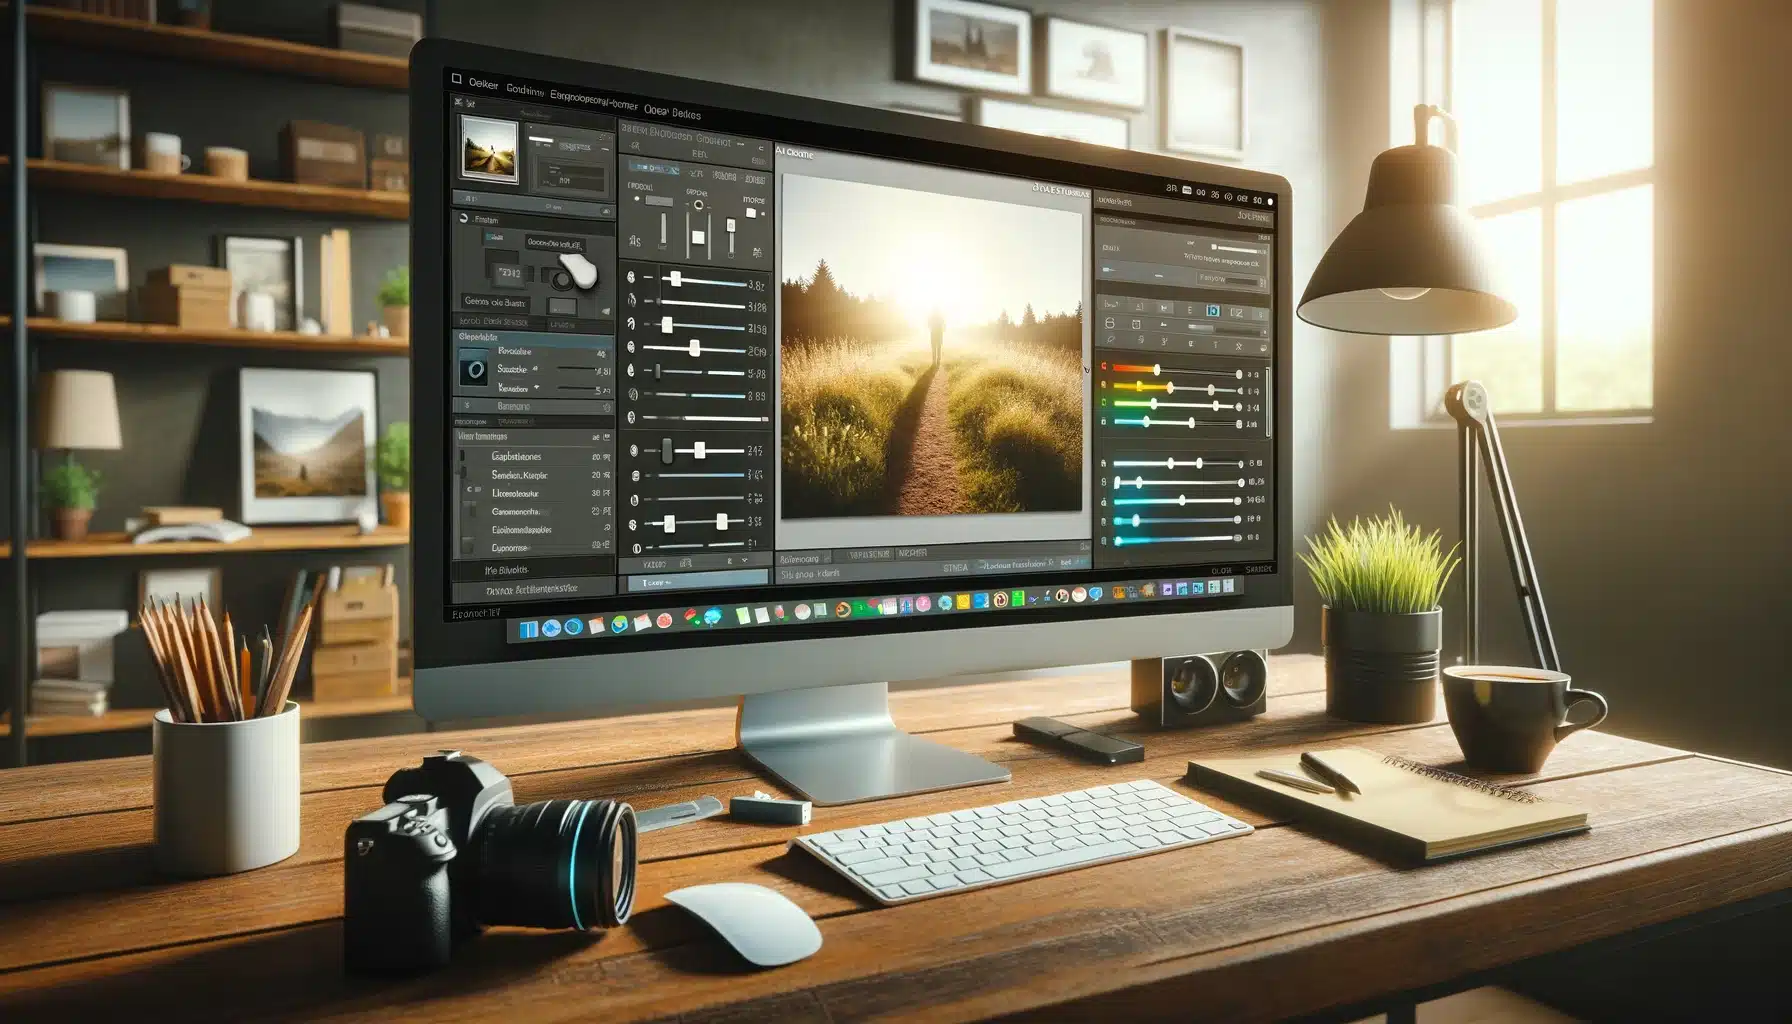 Photographer's desktop with a computer screen displaying photo editing software, adjusting sliders to fix an overexposed photo, surrounded by professional photography equipment.